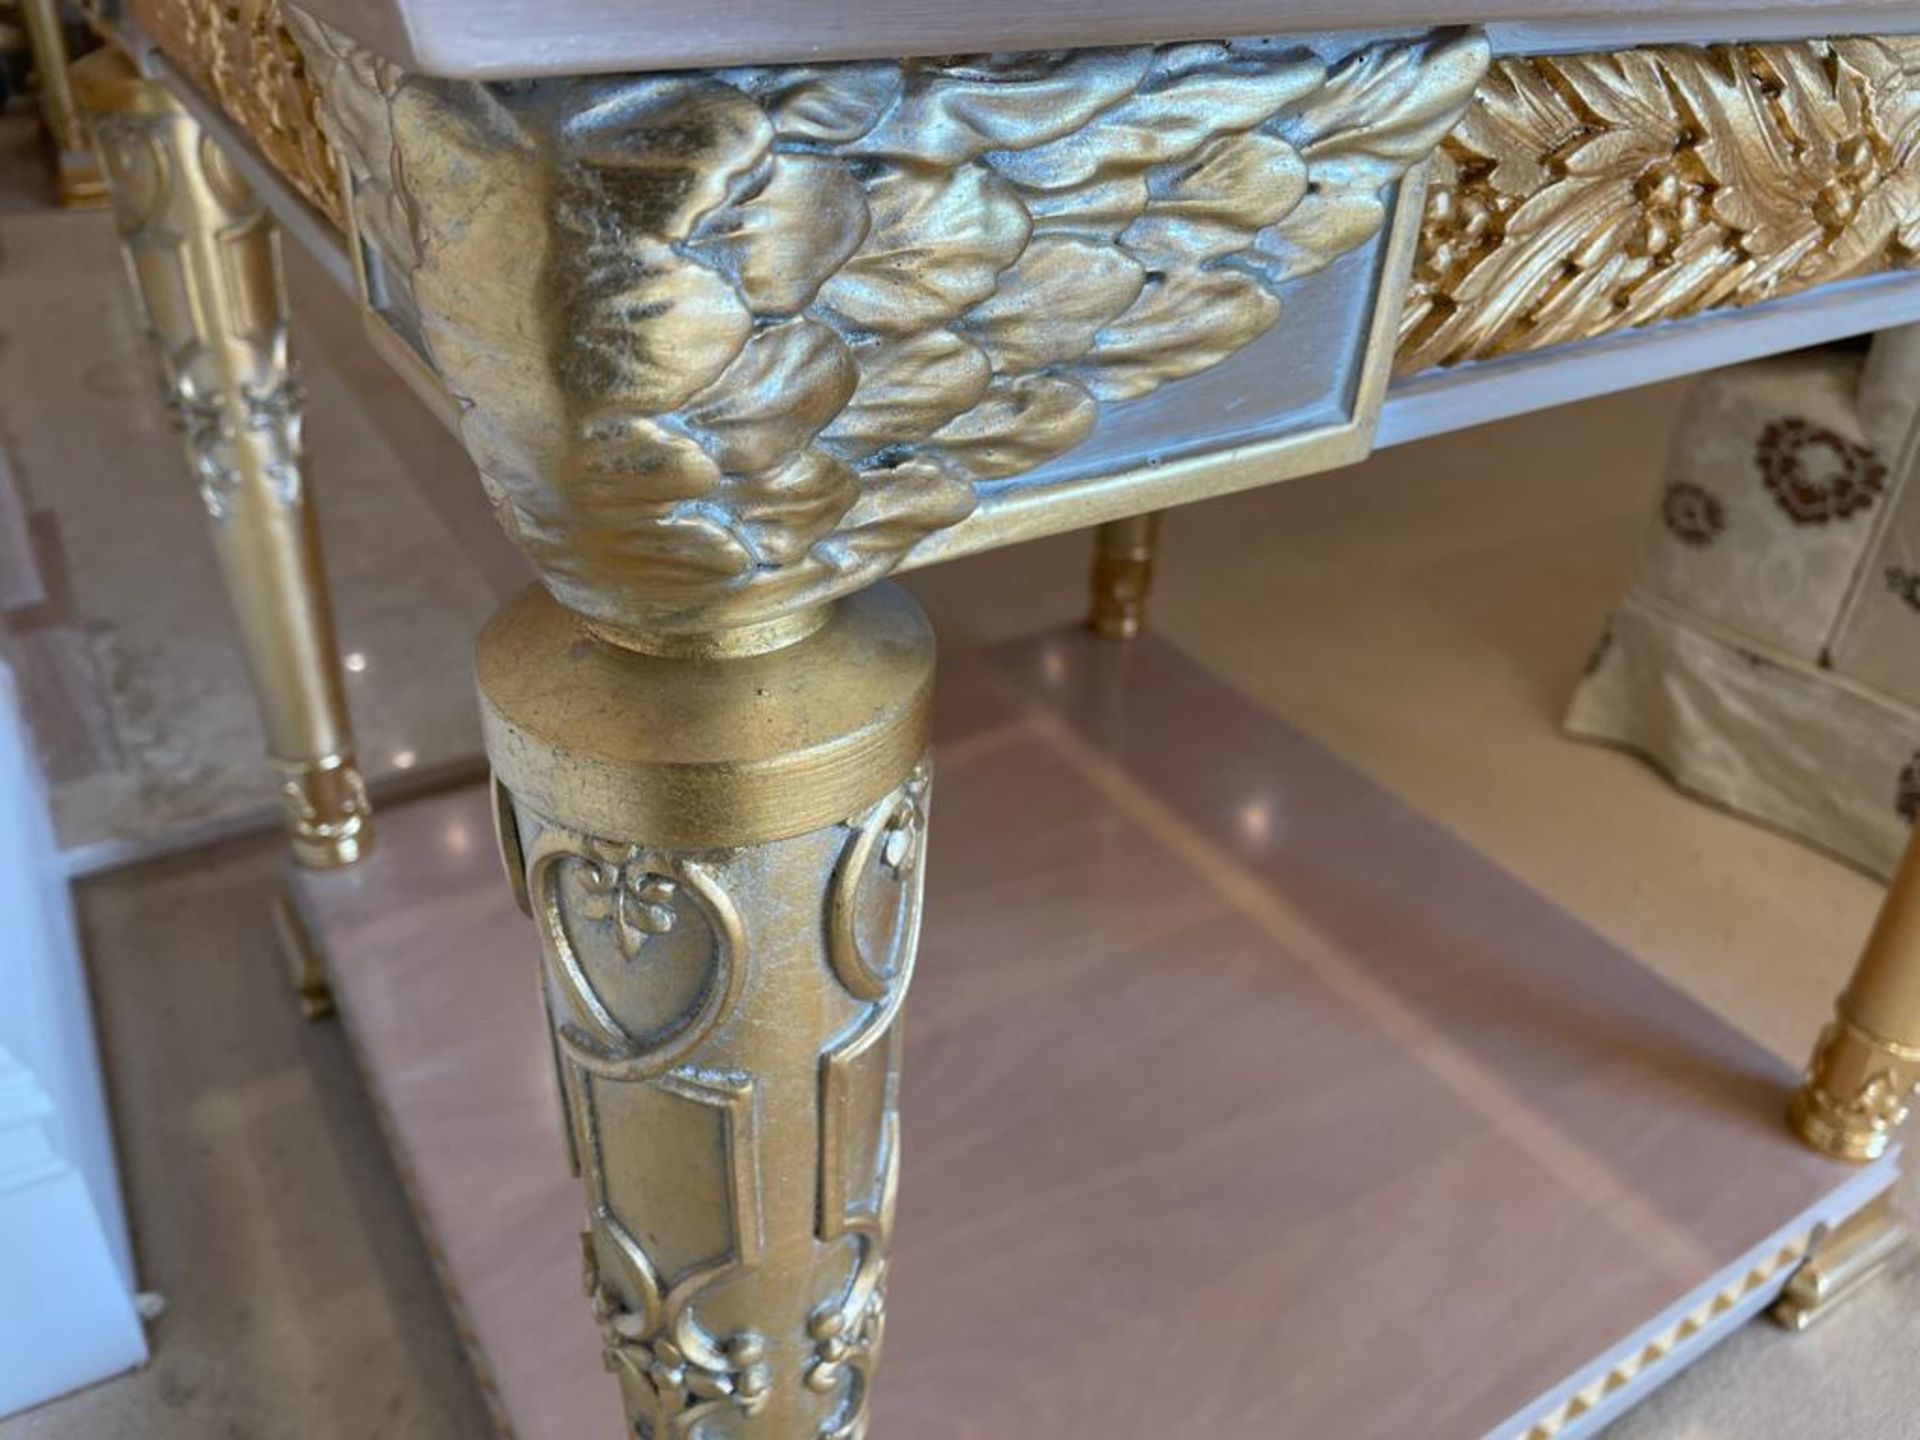 2 x Hand Carved Ornate Side Tables Complimented With Birchwood Veneer, Golden Pillar Legs, Carved - Image 4 of 13